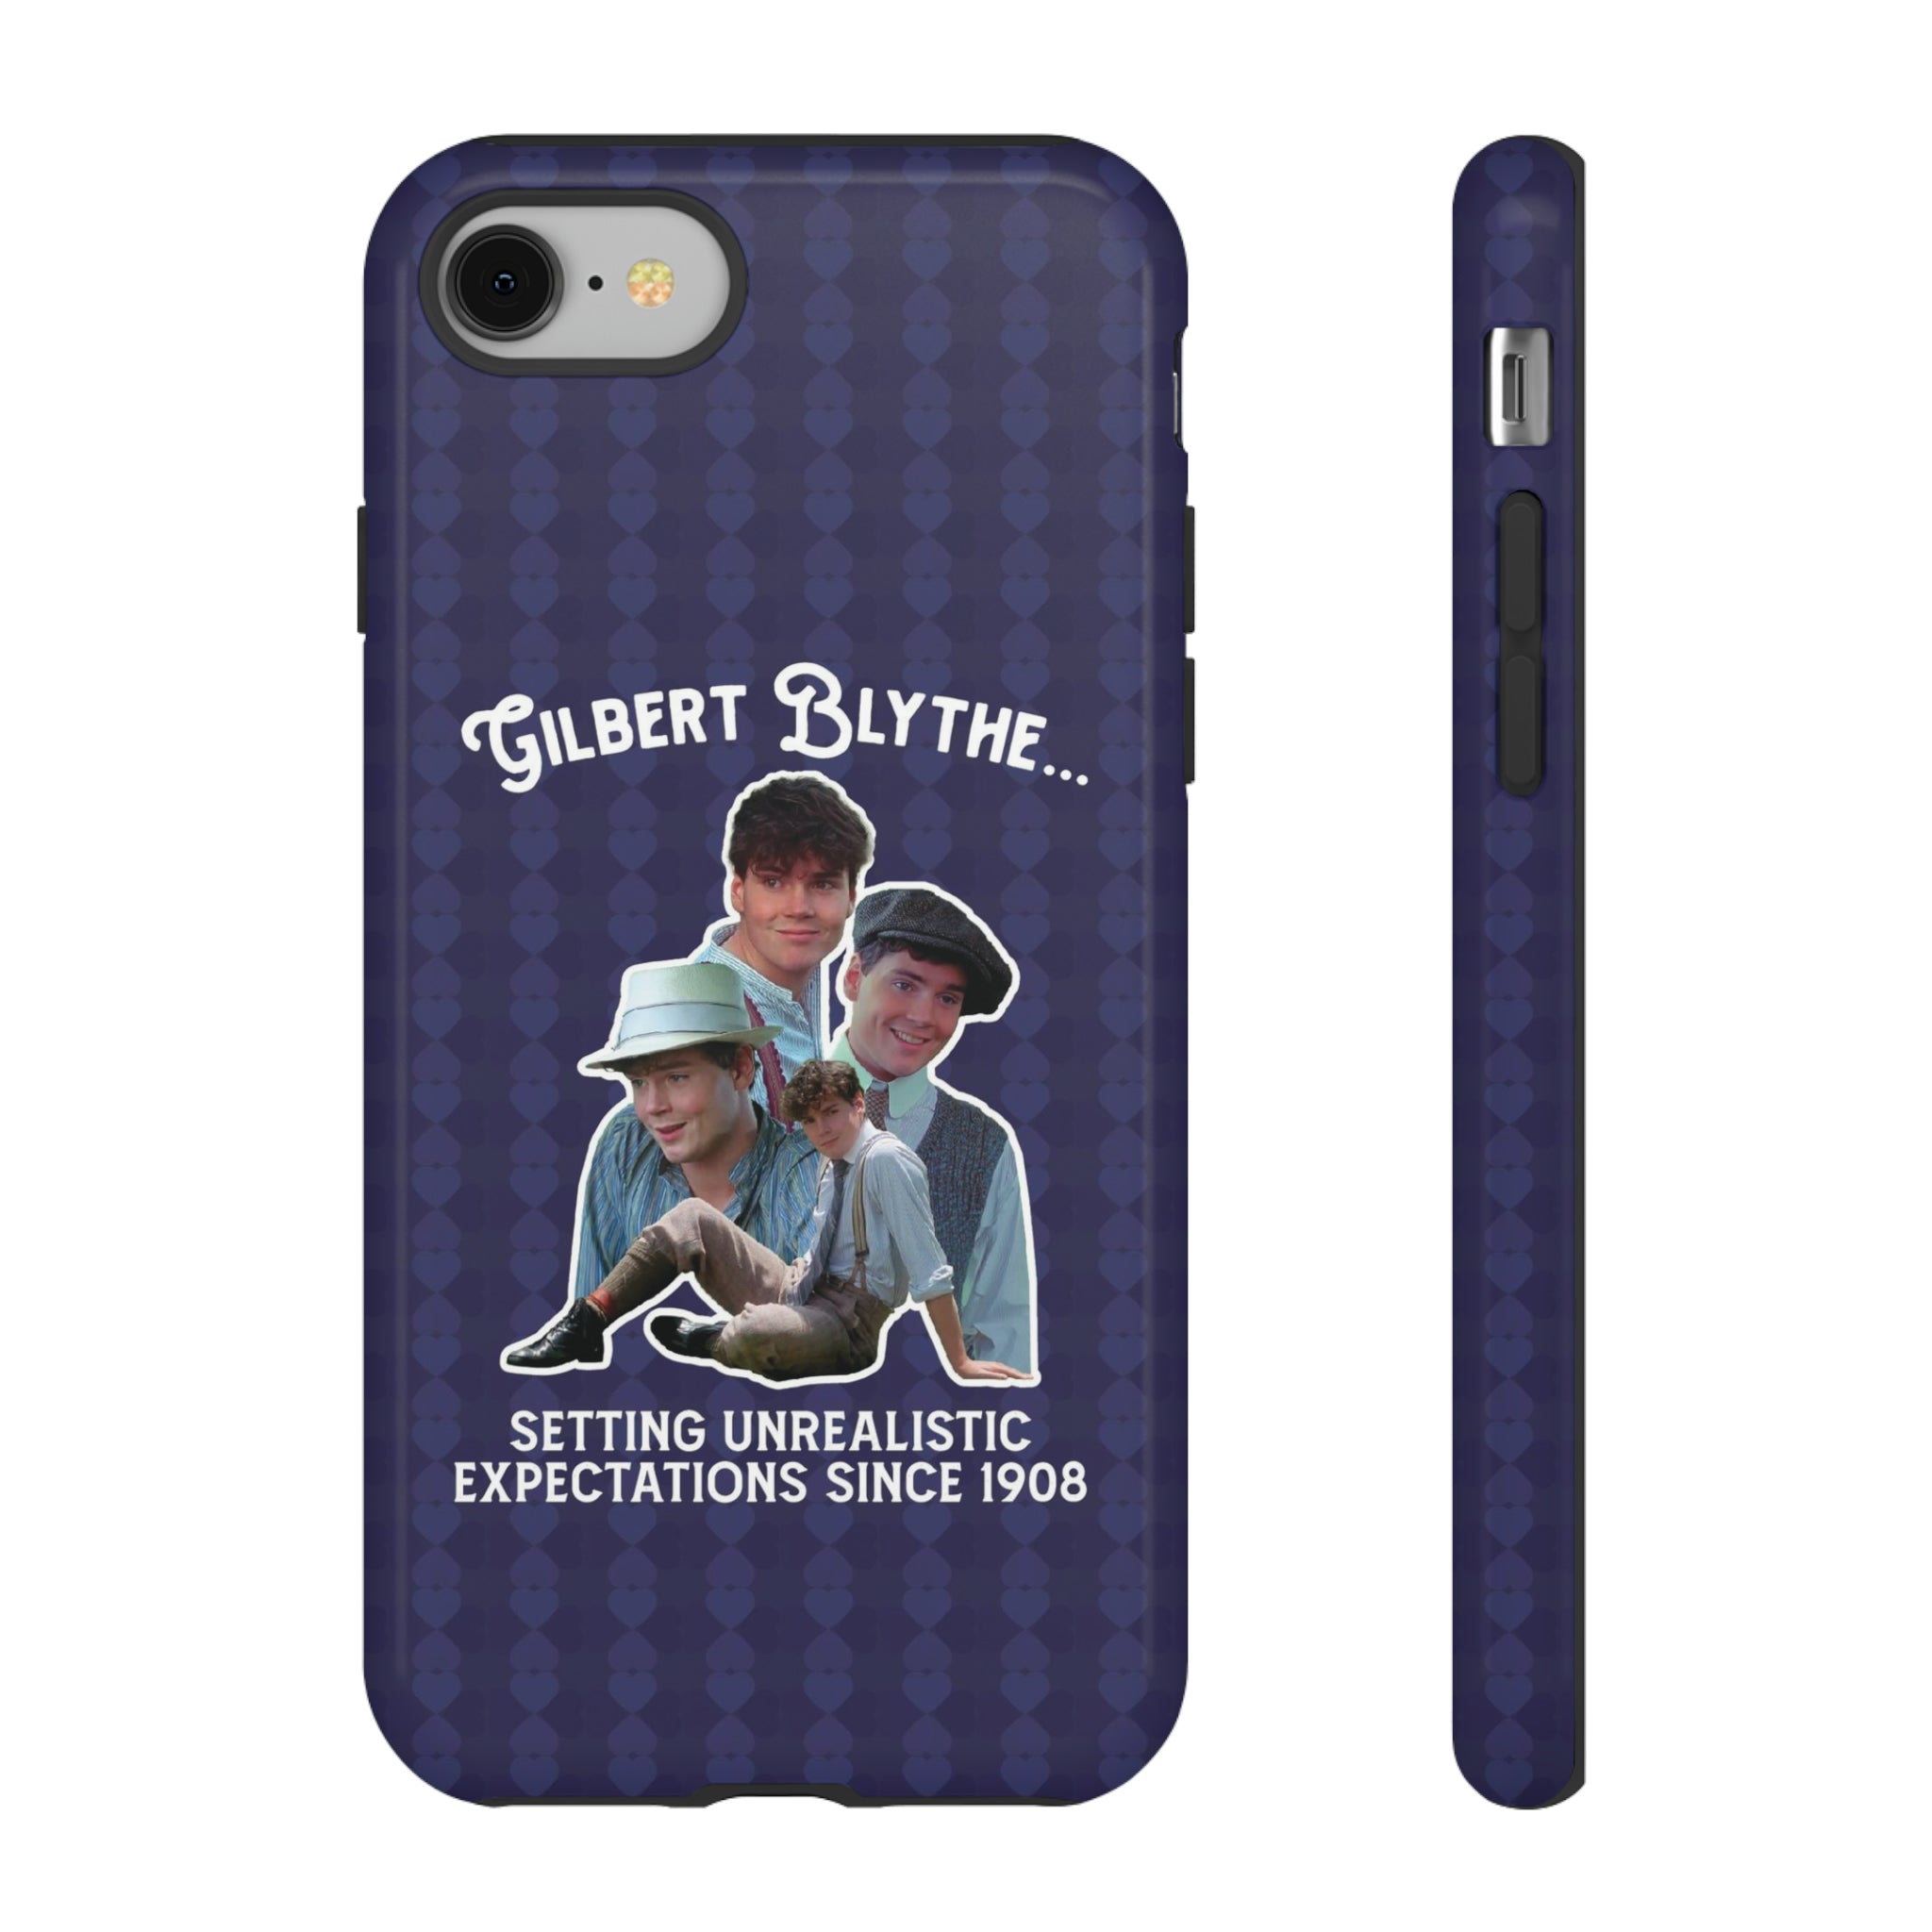 Gilbert Blythe Unrealistic Expectations Phone Case